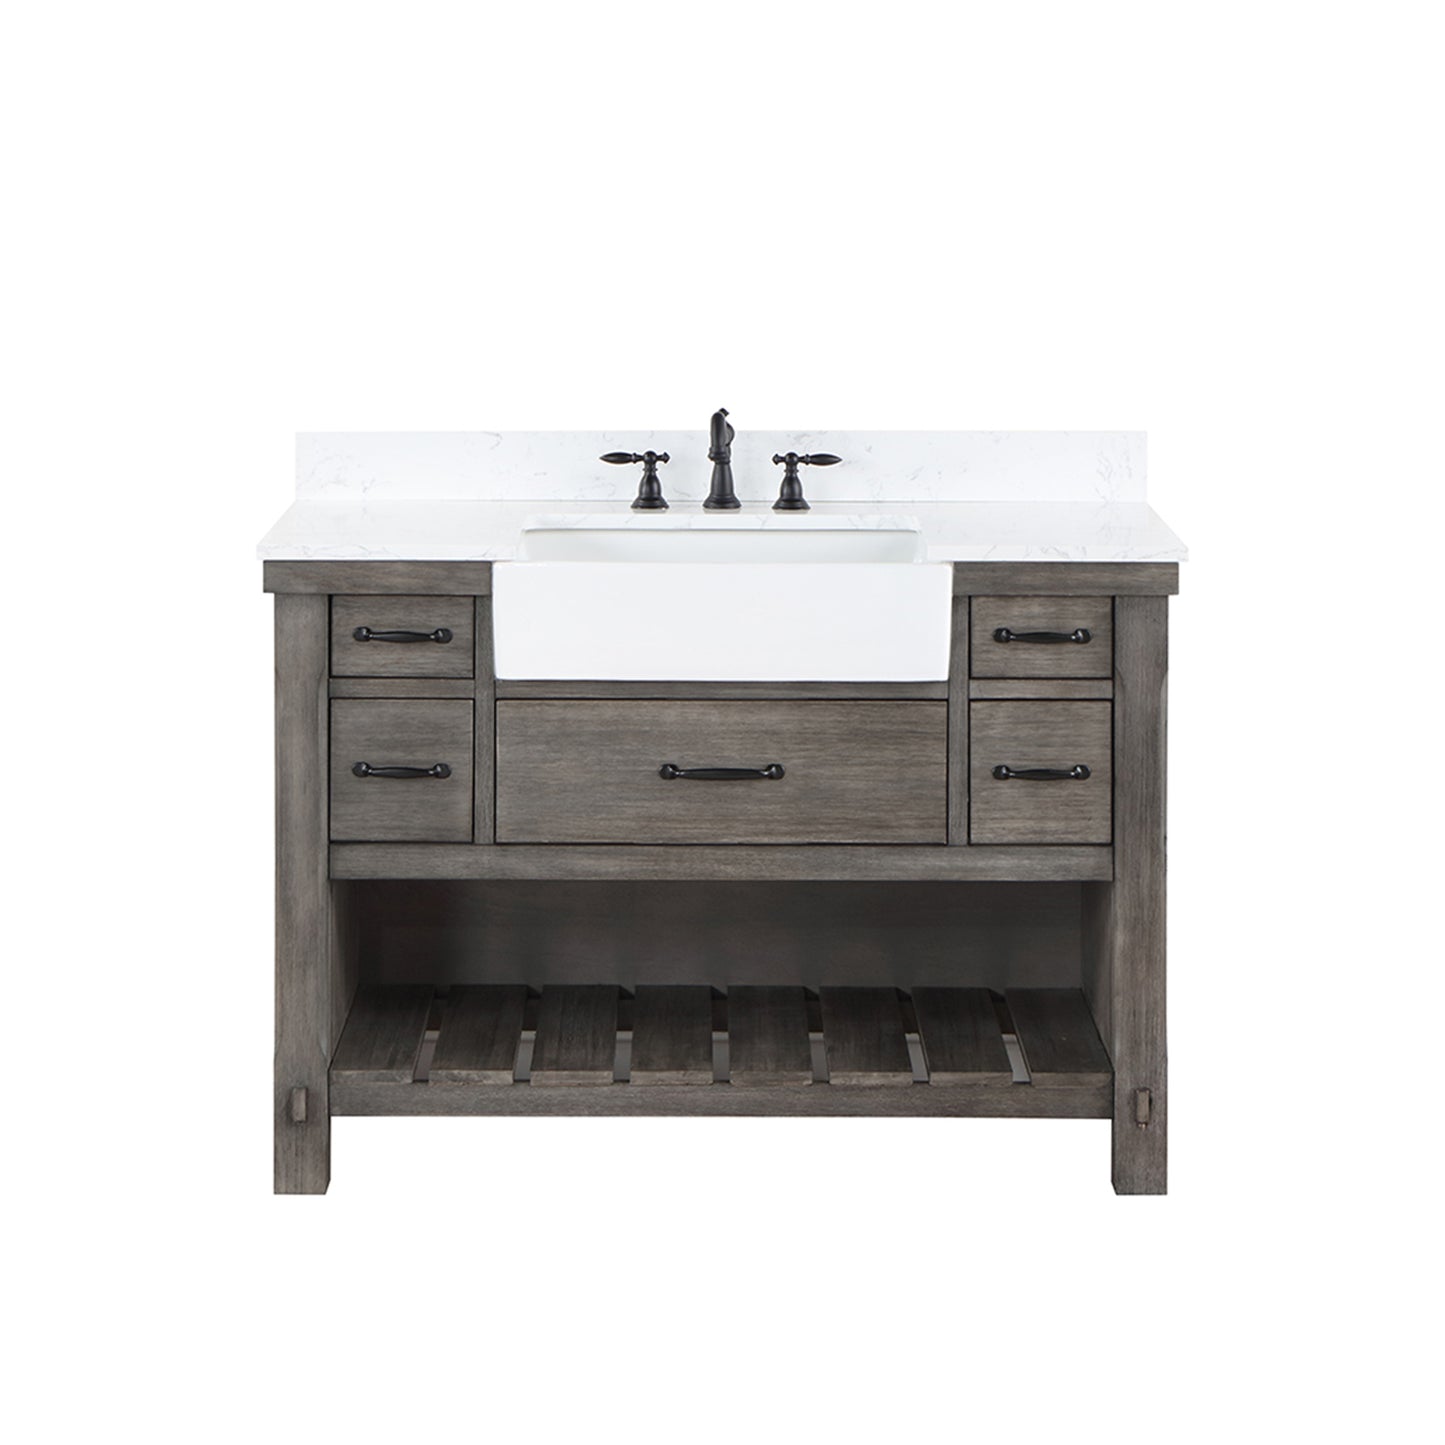 Villareal 48" Single Bath Vanity in Classical Grey with Composite Stone Top in White, White Farmhouse Basin